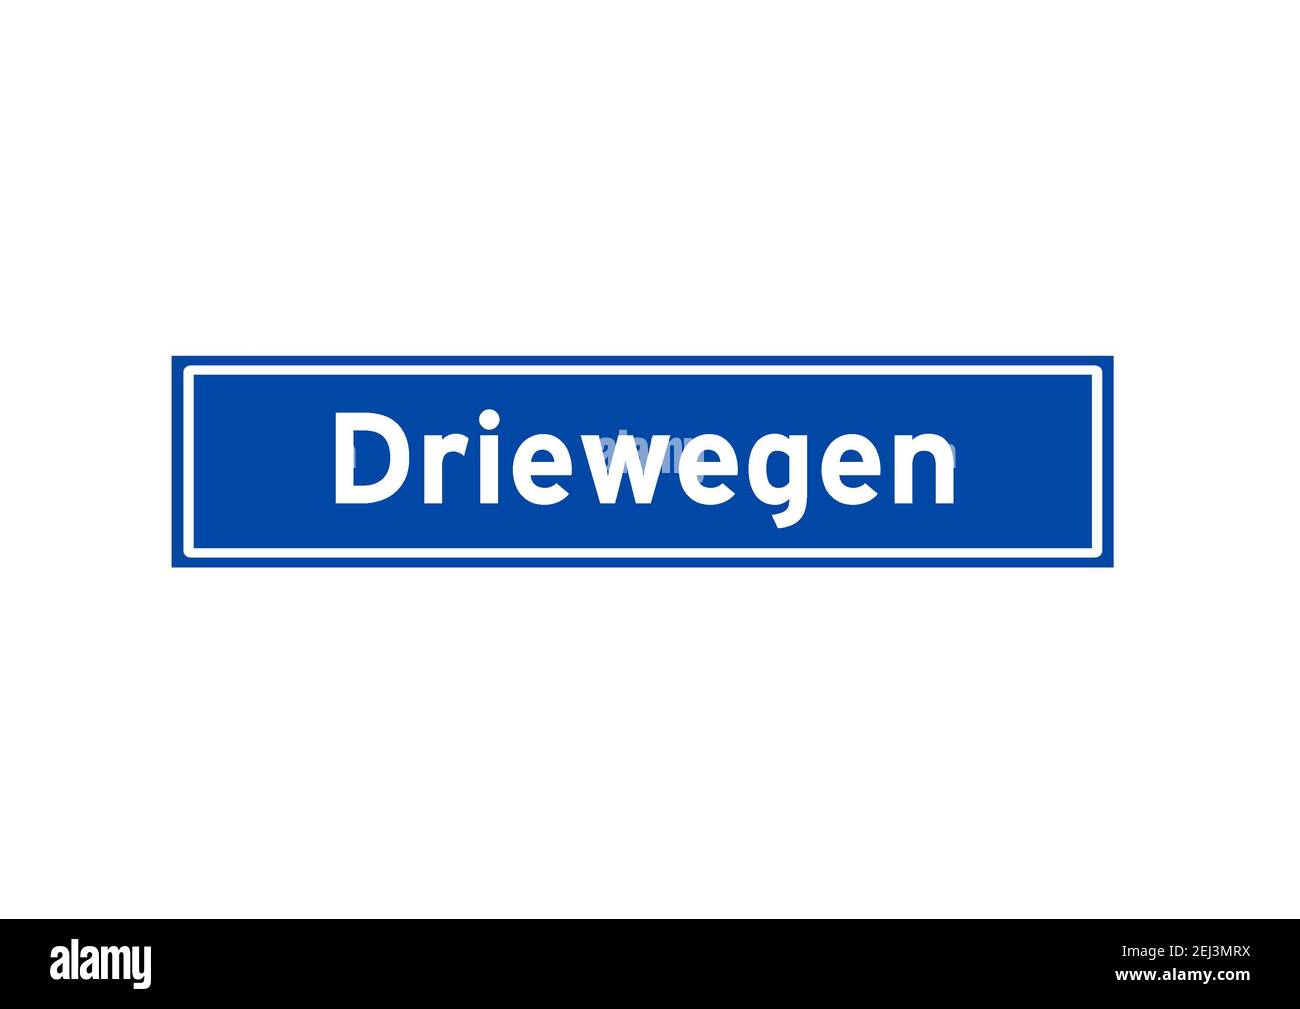 Driewegen isolated Dutch place name sign. City sign from the Netherlands. Stock Photo